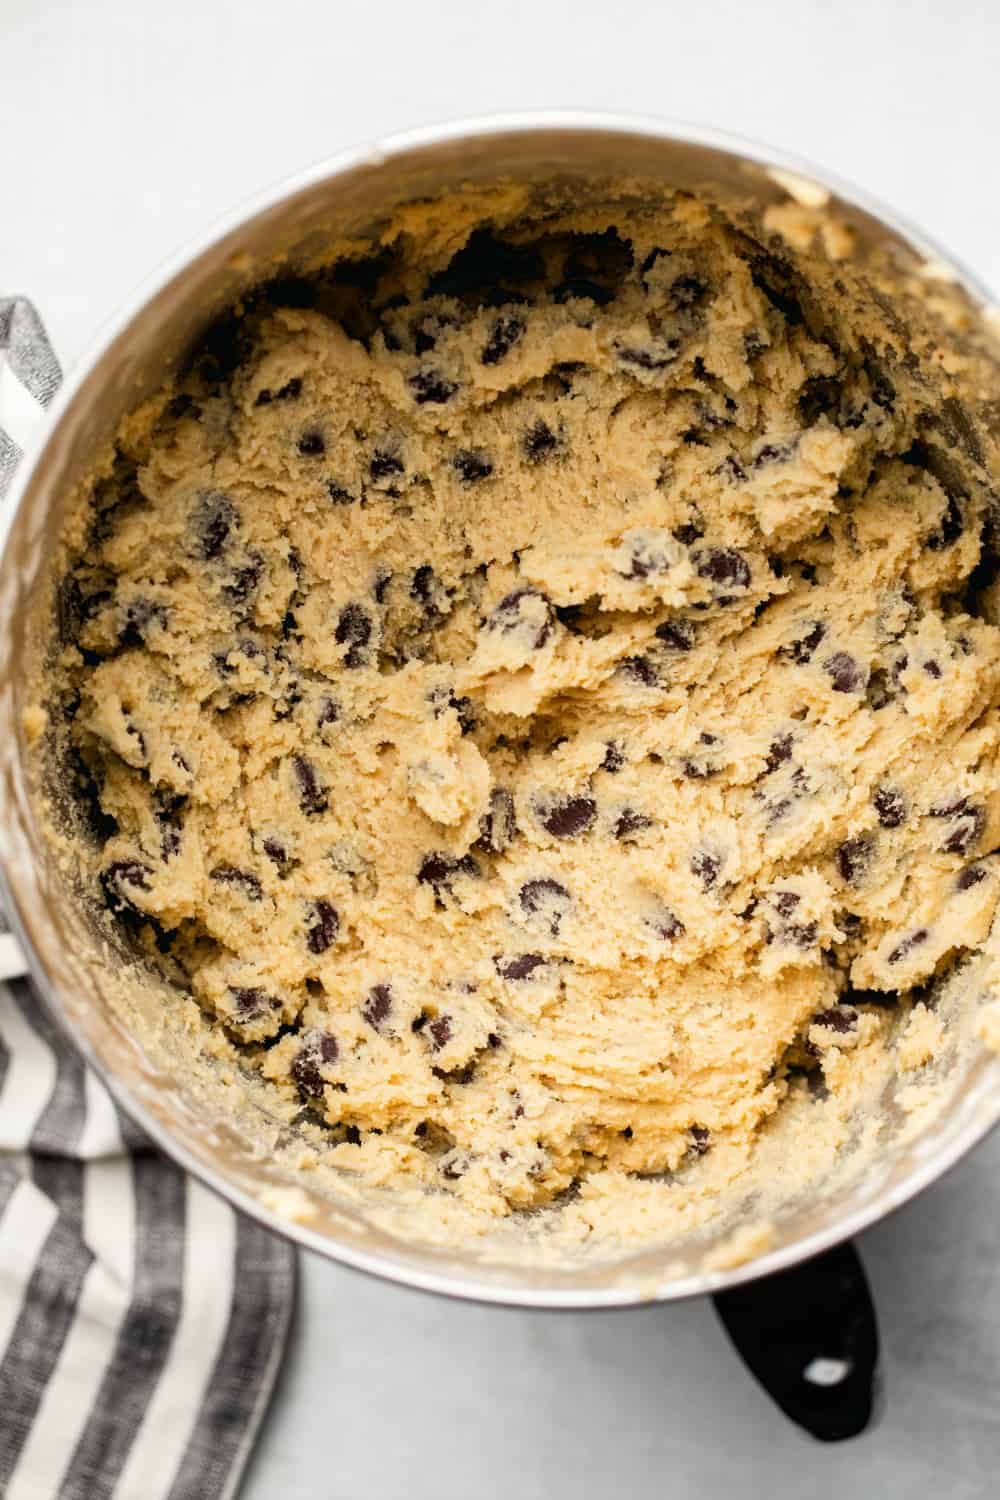 Frozen cookie dough is easy to make and so convenient any time a craving for freshly-baked cookies hits